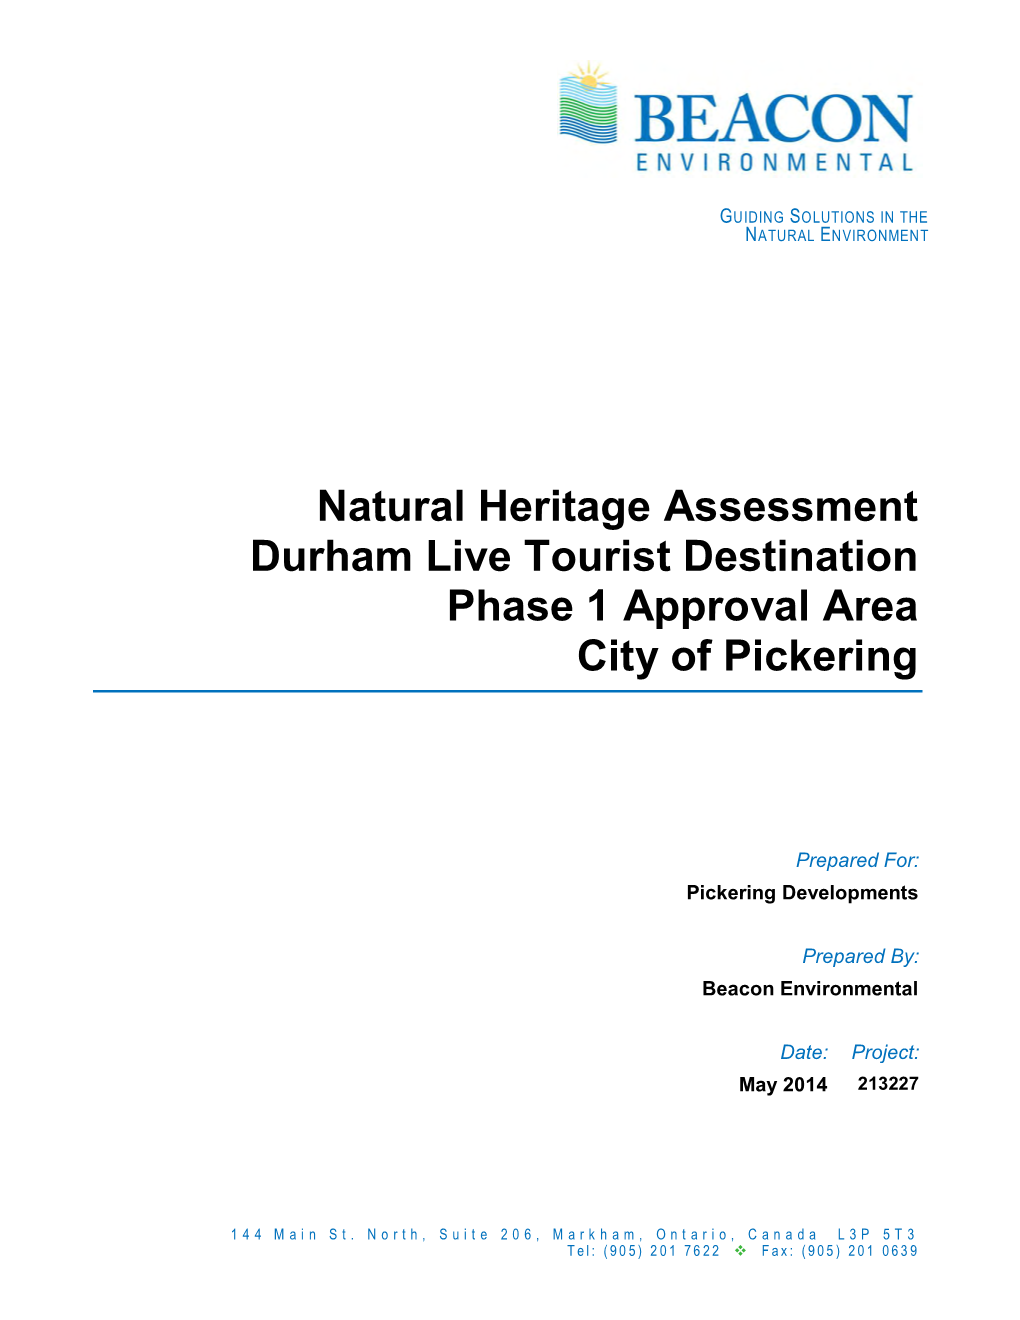 Natural Heritage Assessment Durham Live Tourist Destination Phase 1 Approval Area City of Pickering